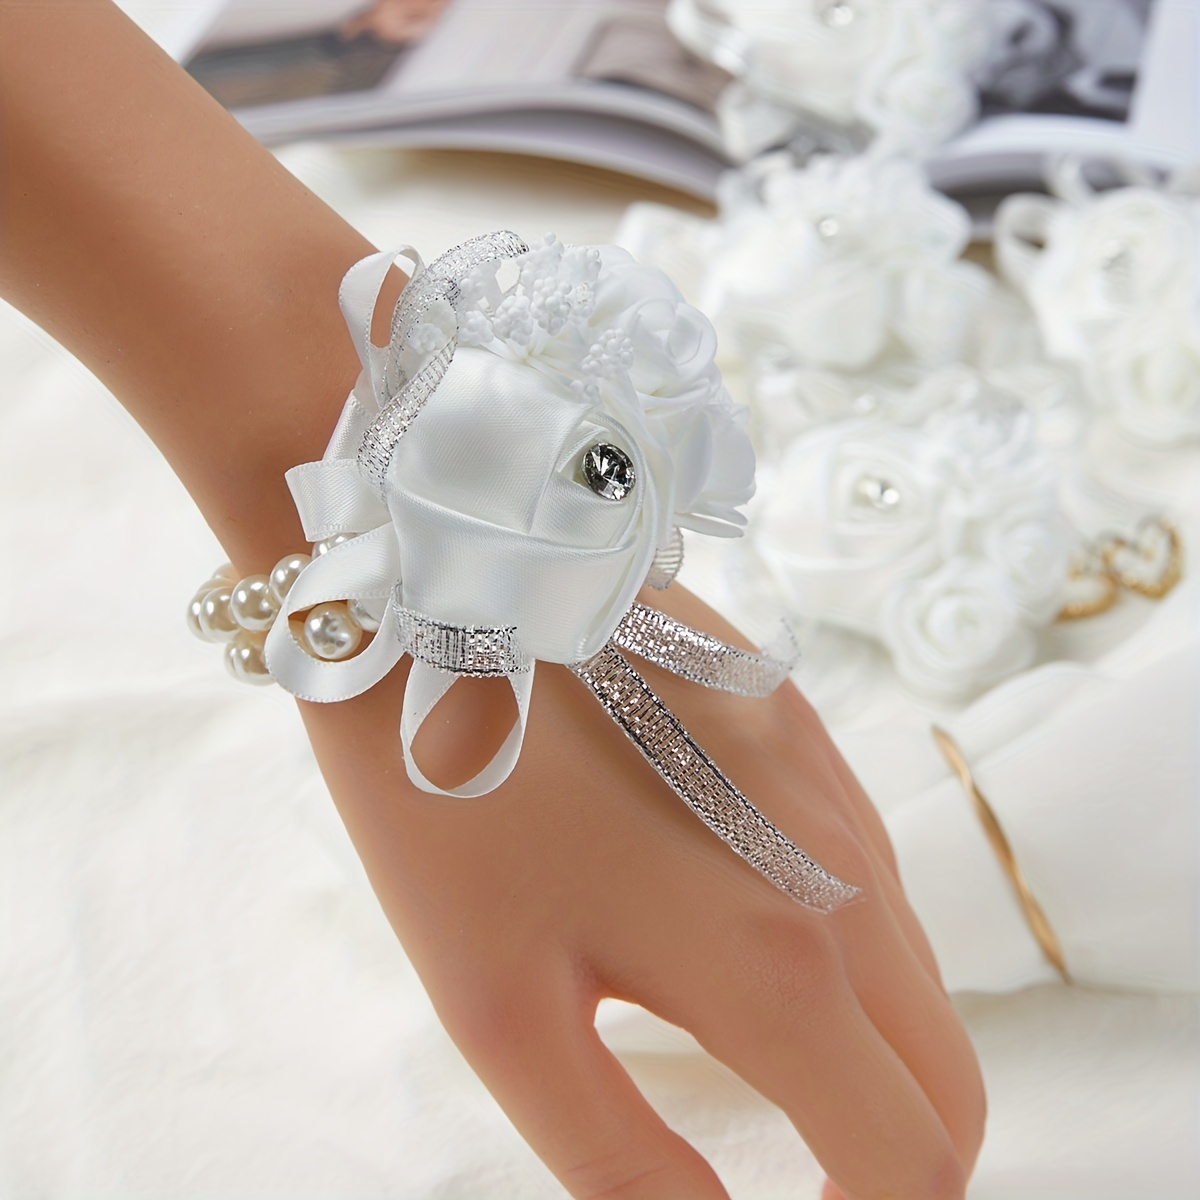 2pcs wrist corsages for bride bridesmaids wedding artificial silk rose faux pearls wrist corsage for women wedding bridal shower bride and groom s mother prom formal dinner party homecoming ceremony anniversary wrist flower decor